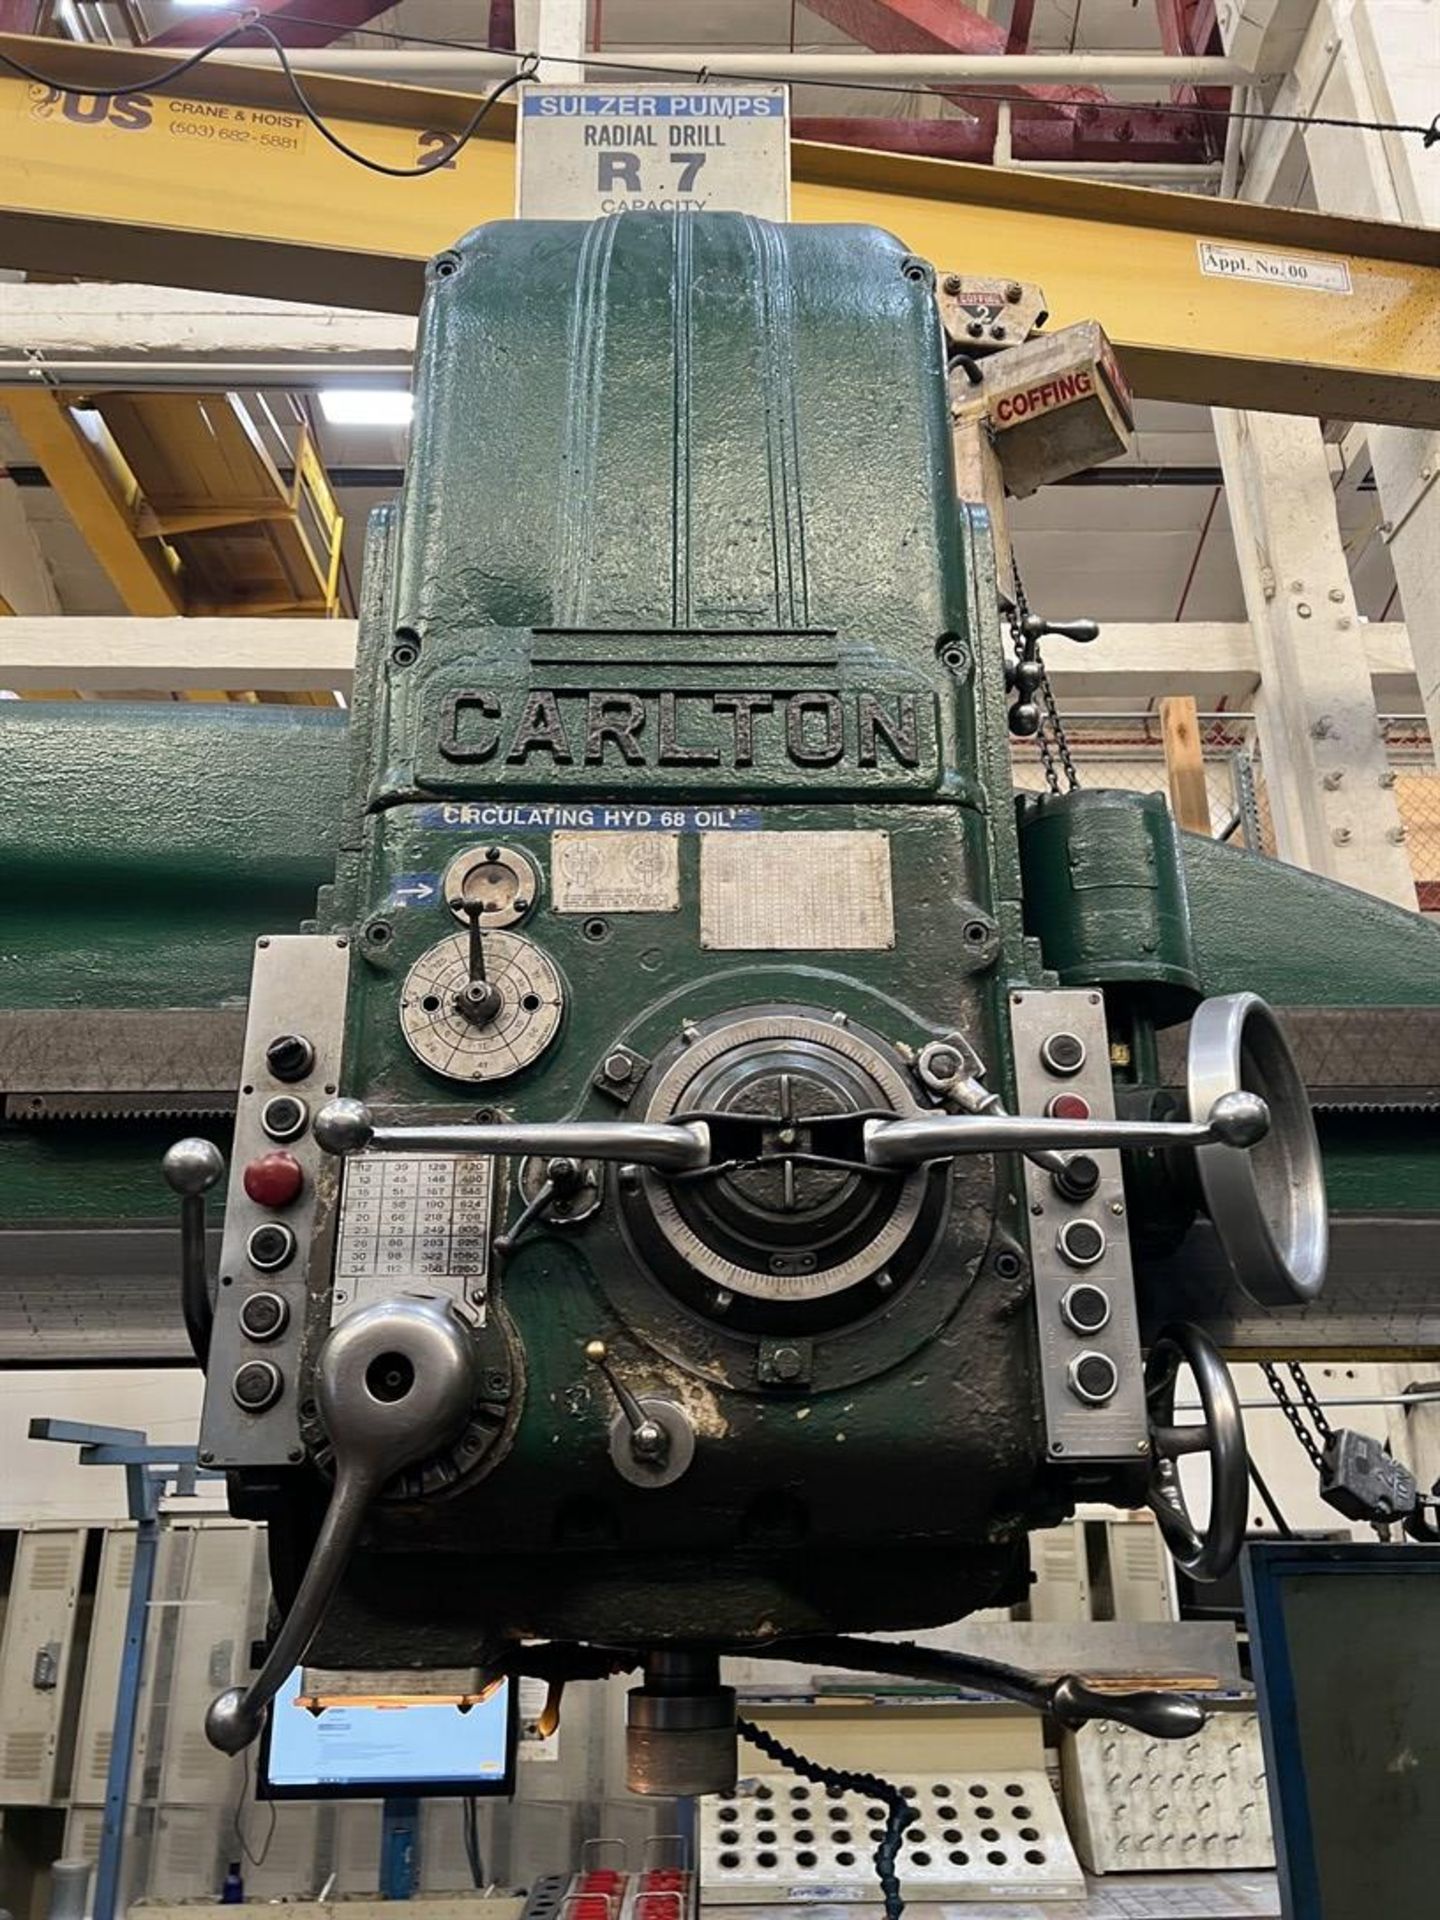 CARLTON 6’ x 17” Radial Arm Drill, 6’ Arm Length, 17” Dia Column, 12-1200 RPM Spindle Speed, 48” x - Image 5 of 7